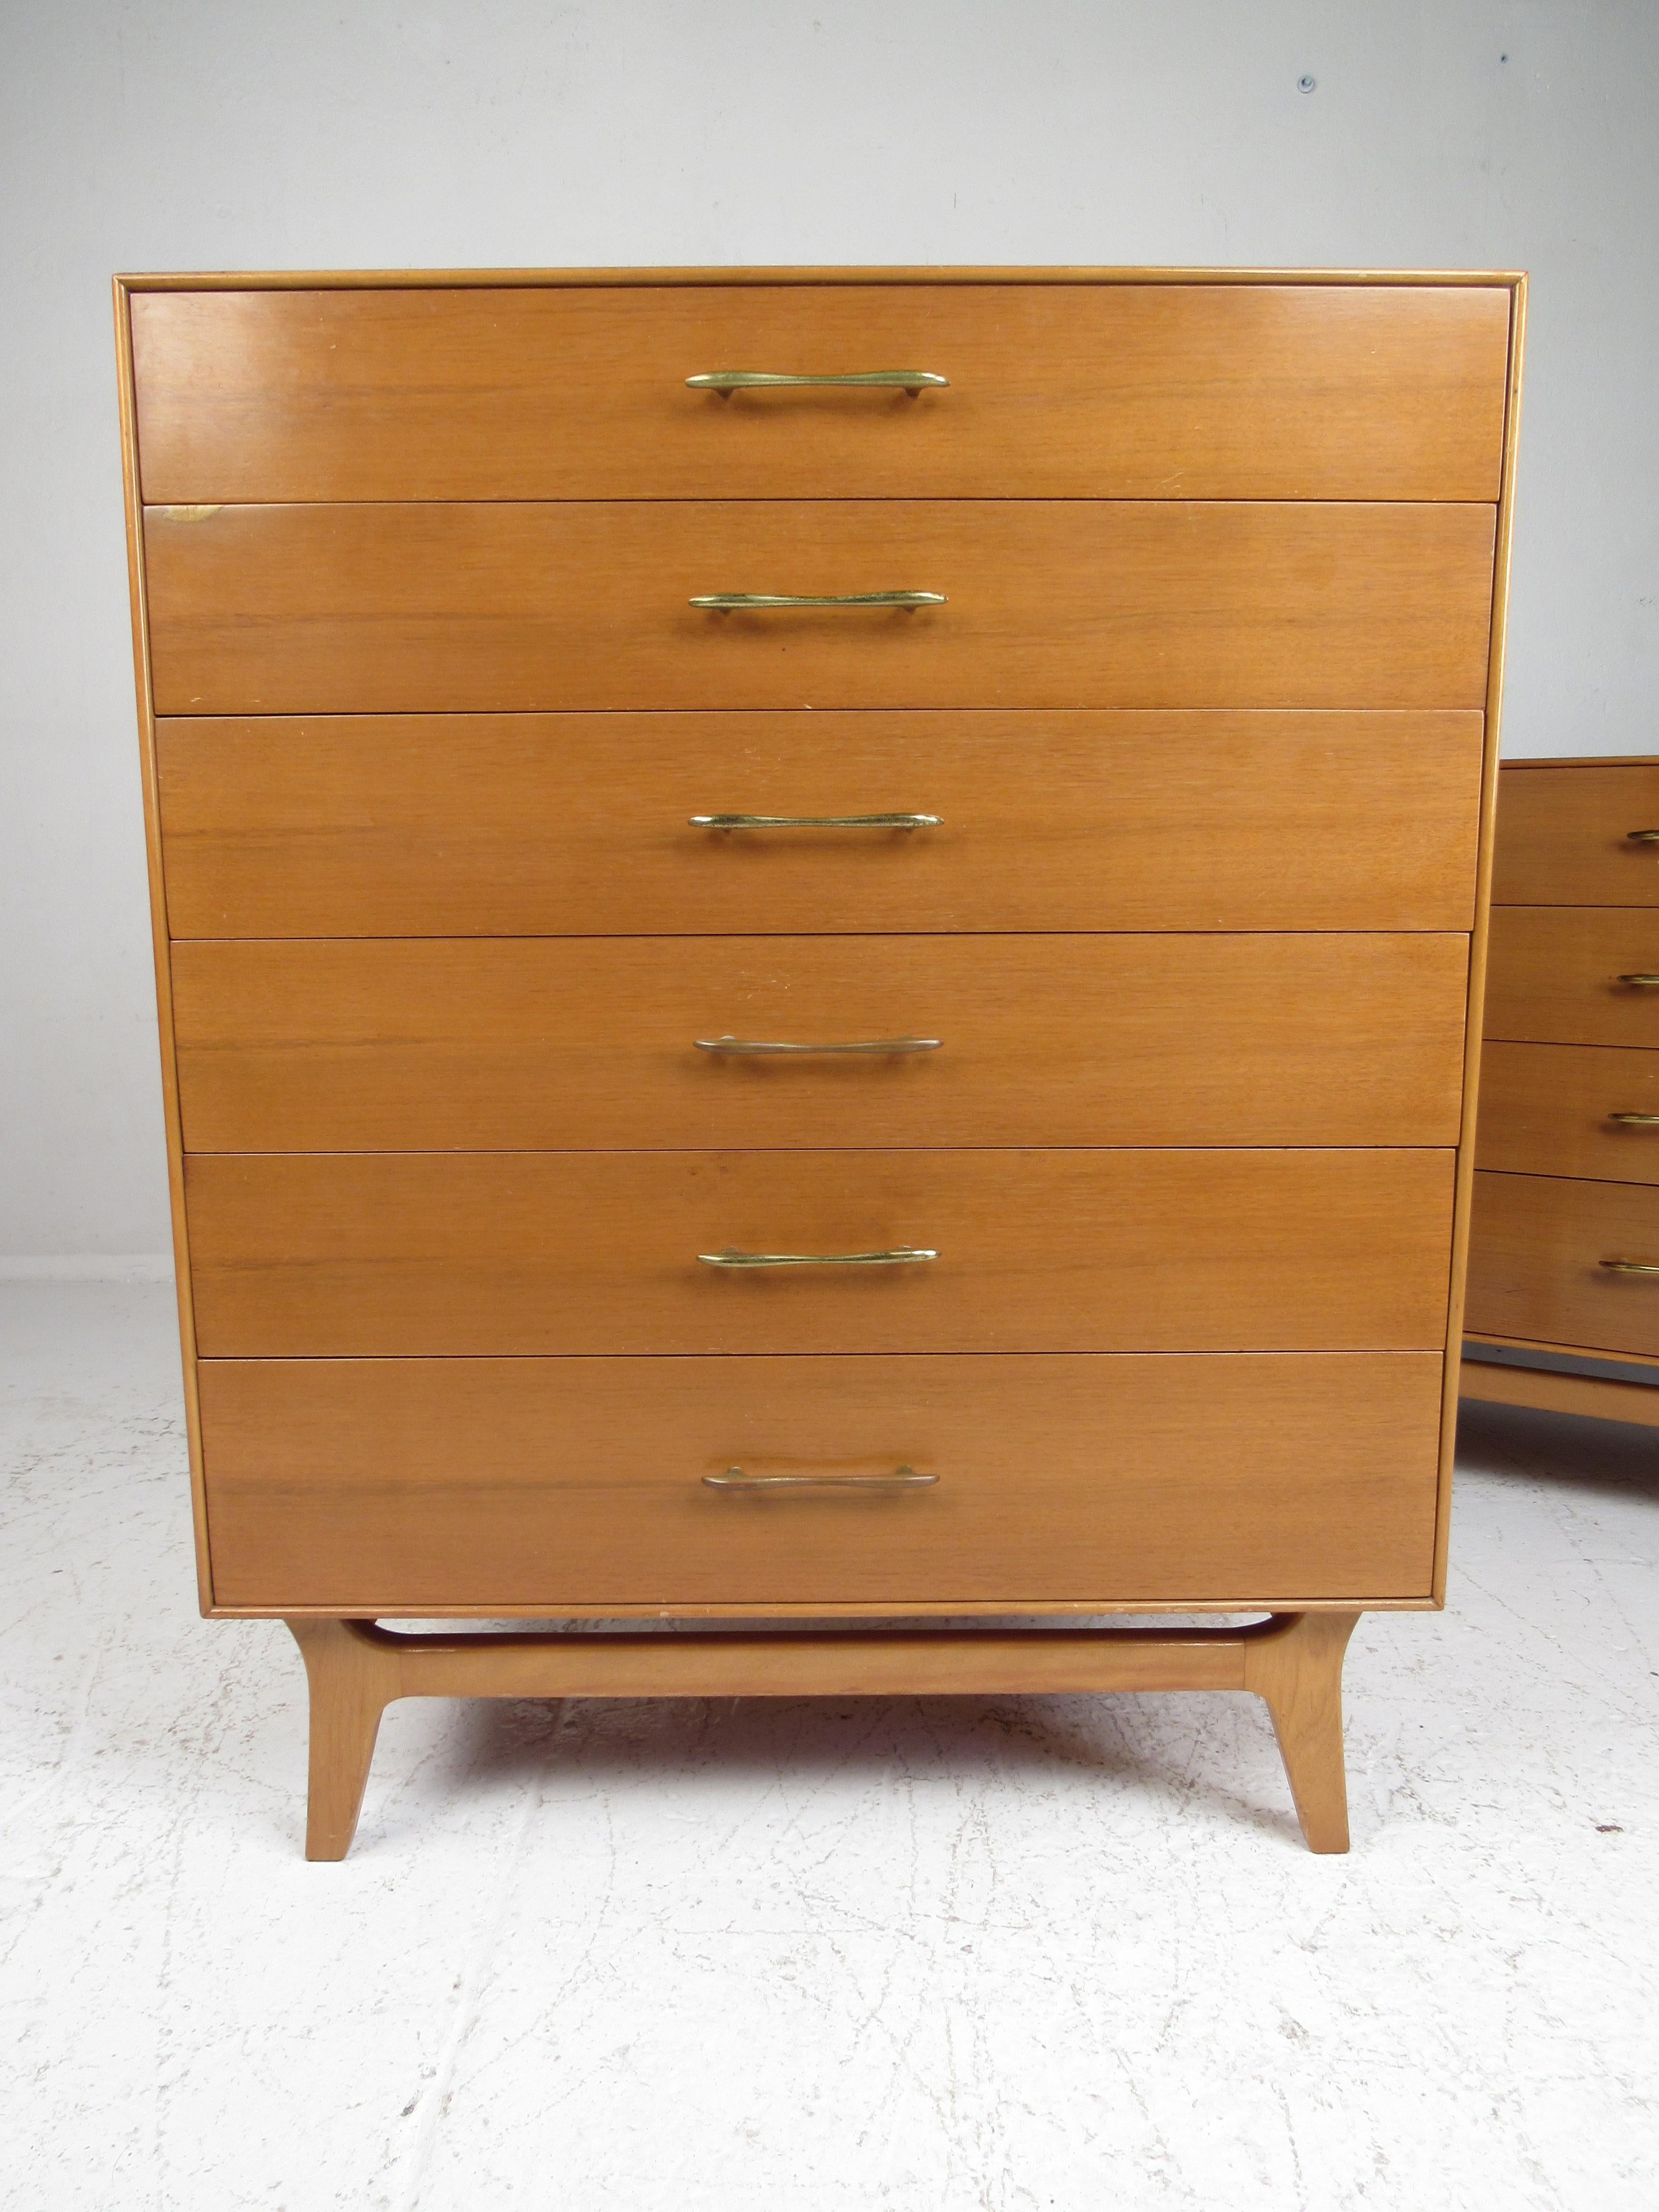 This exquisite vintage modern bedroom set includes a highboy dresser, low dresser, mirror, and a pair of nightstands. A sleek design that boasts splayed legs on a sculpted base and the iconic R-Way brass drawer pulls. This is a well made midcentury